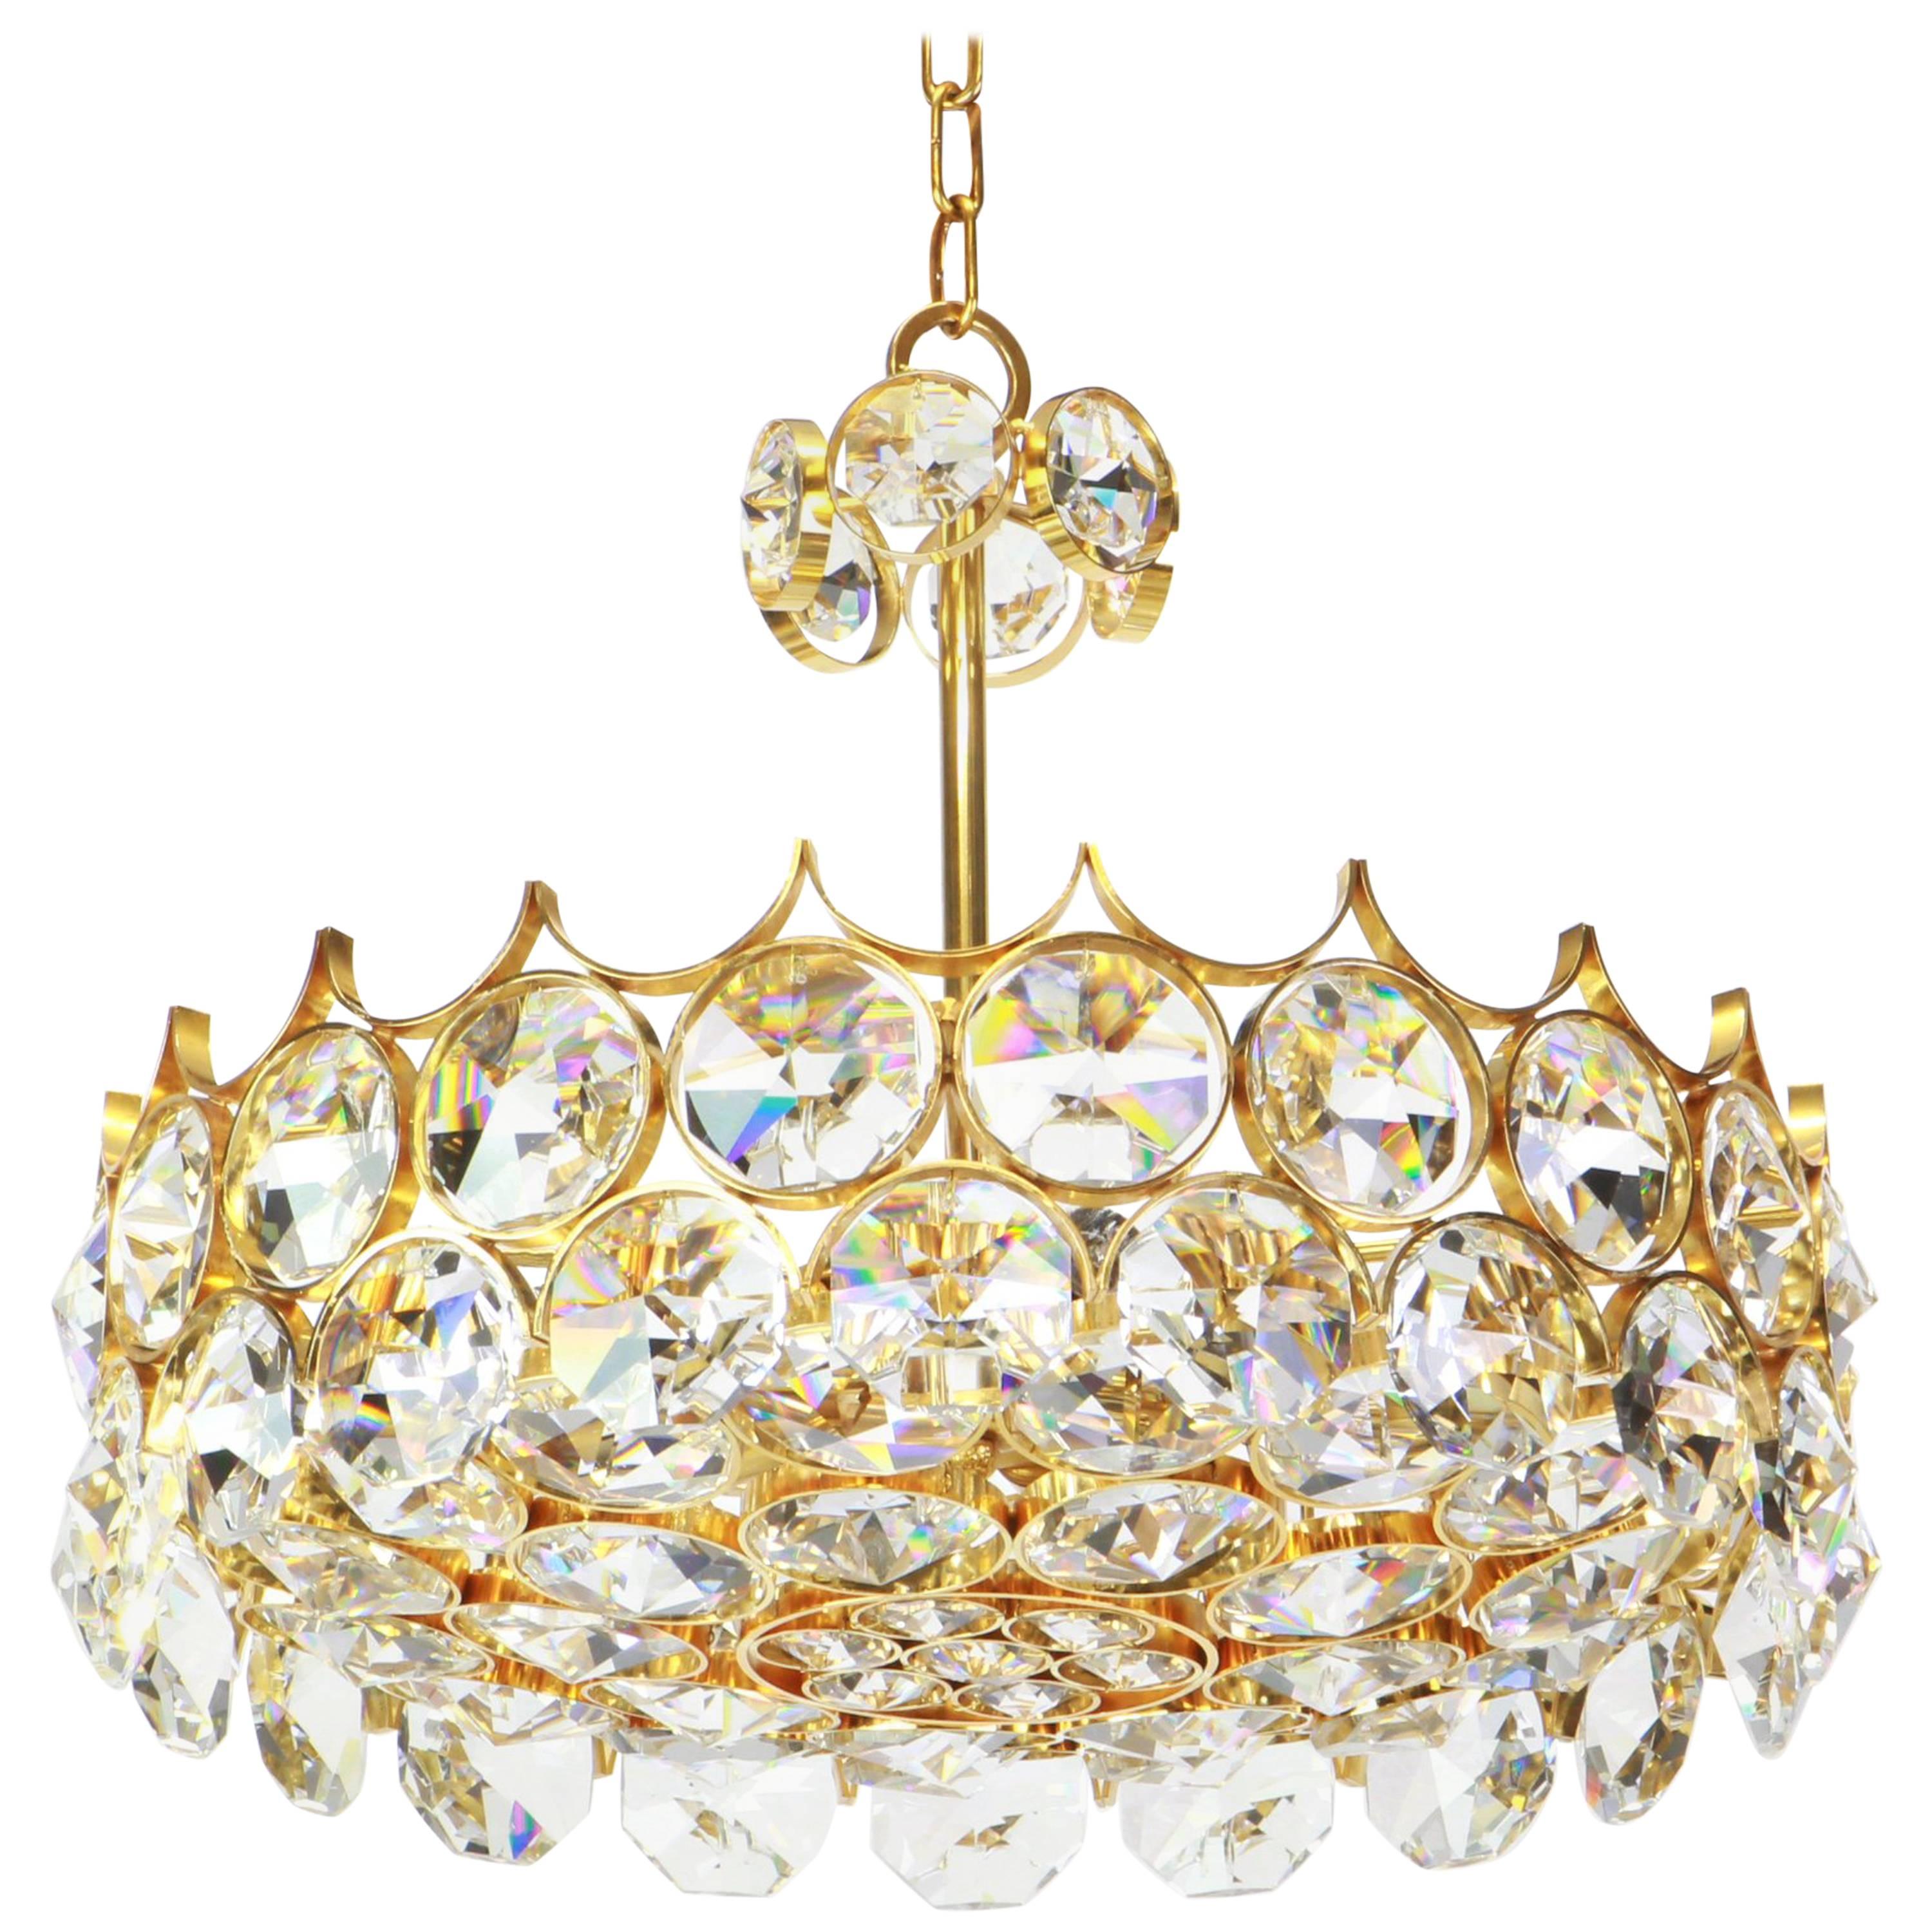 A wonderful and high quality gilded chandelier/pendant light fixture by Palwa (Palme & Walter), Germany, 1970s

It is made of a 24-carat gold-plated brass frame decorated with hundreds of cut crystal glass. The bottom is made of a round cut glass